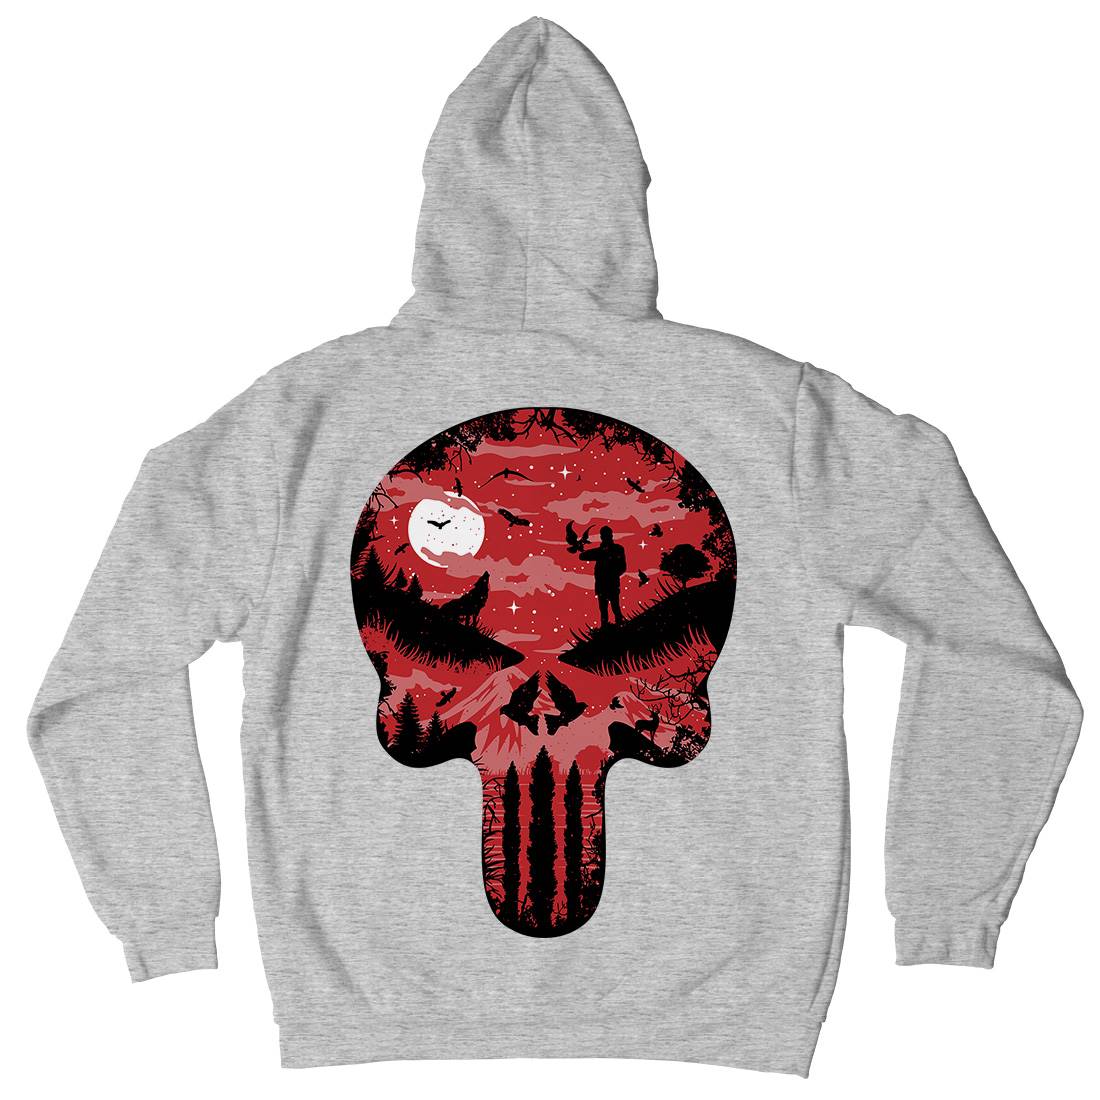 Stand And Bleed Mens Hoodie With Pocket Horror B085